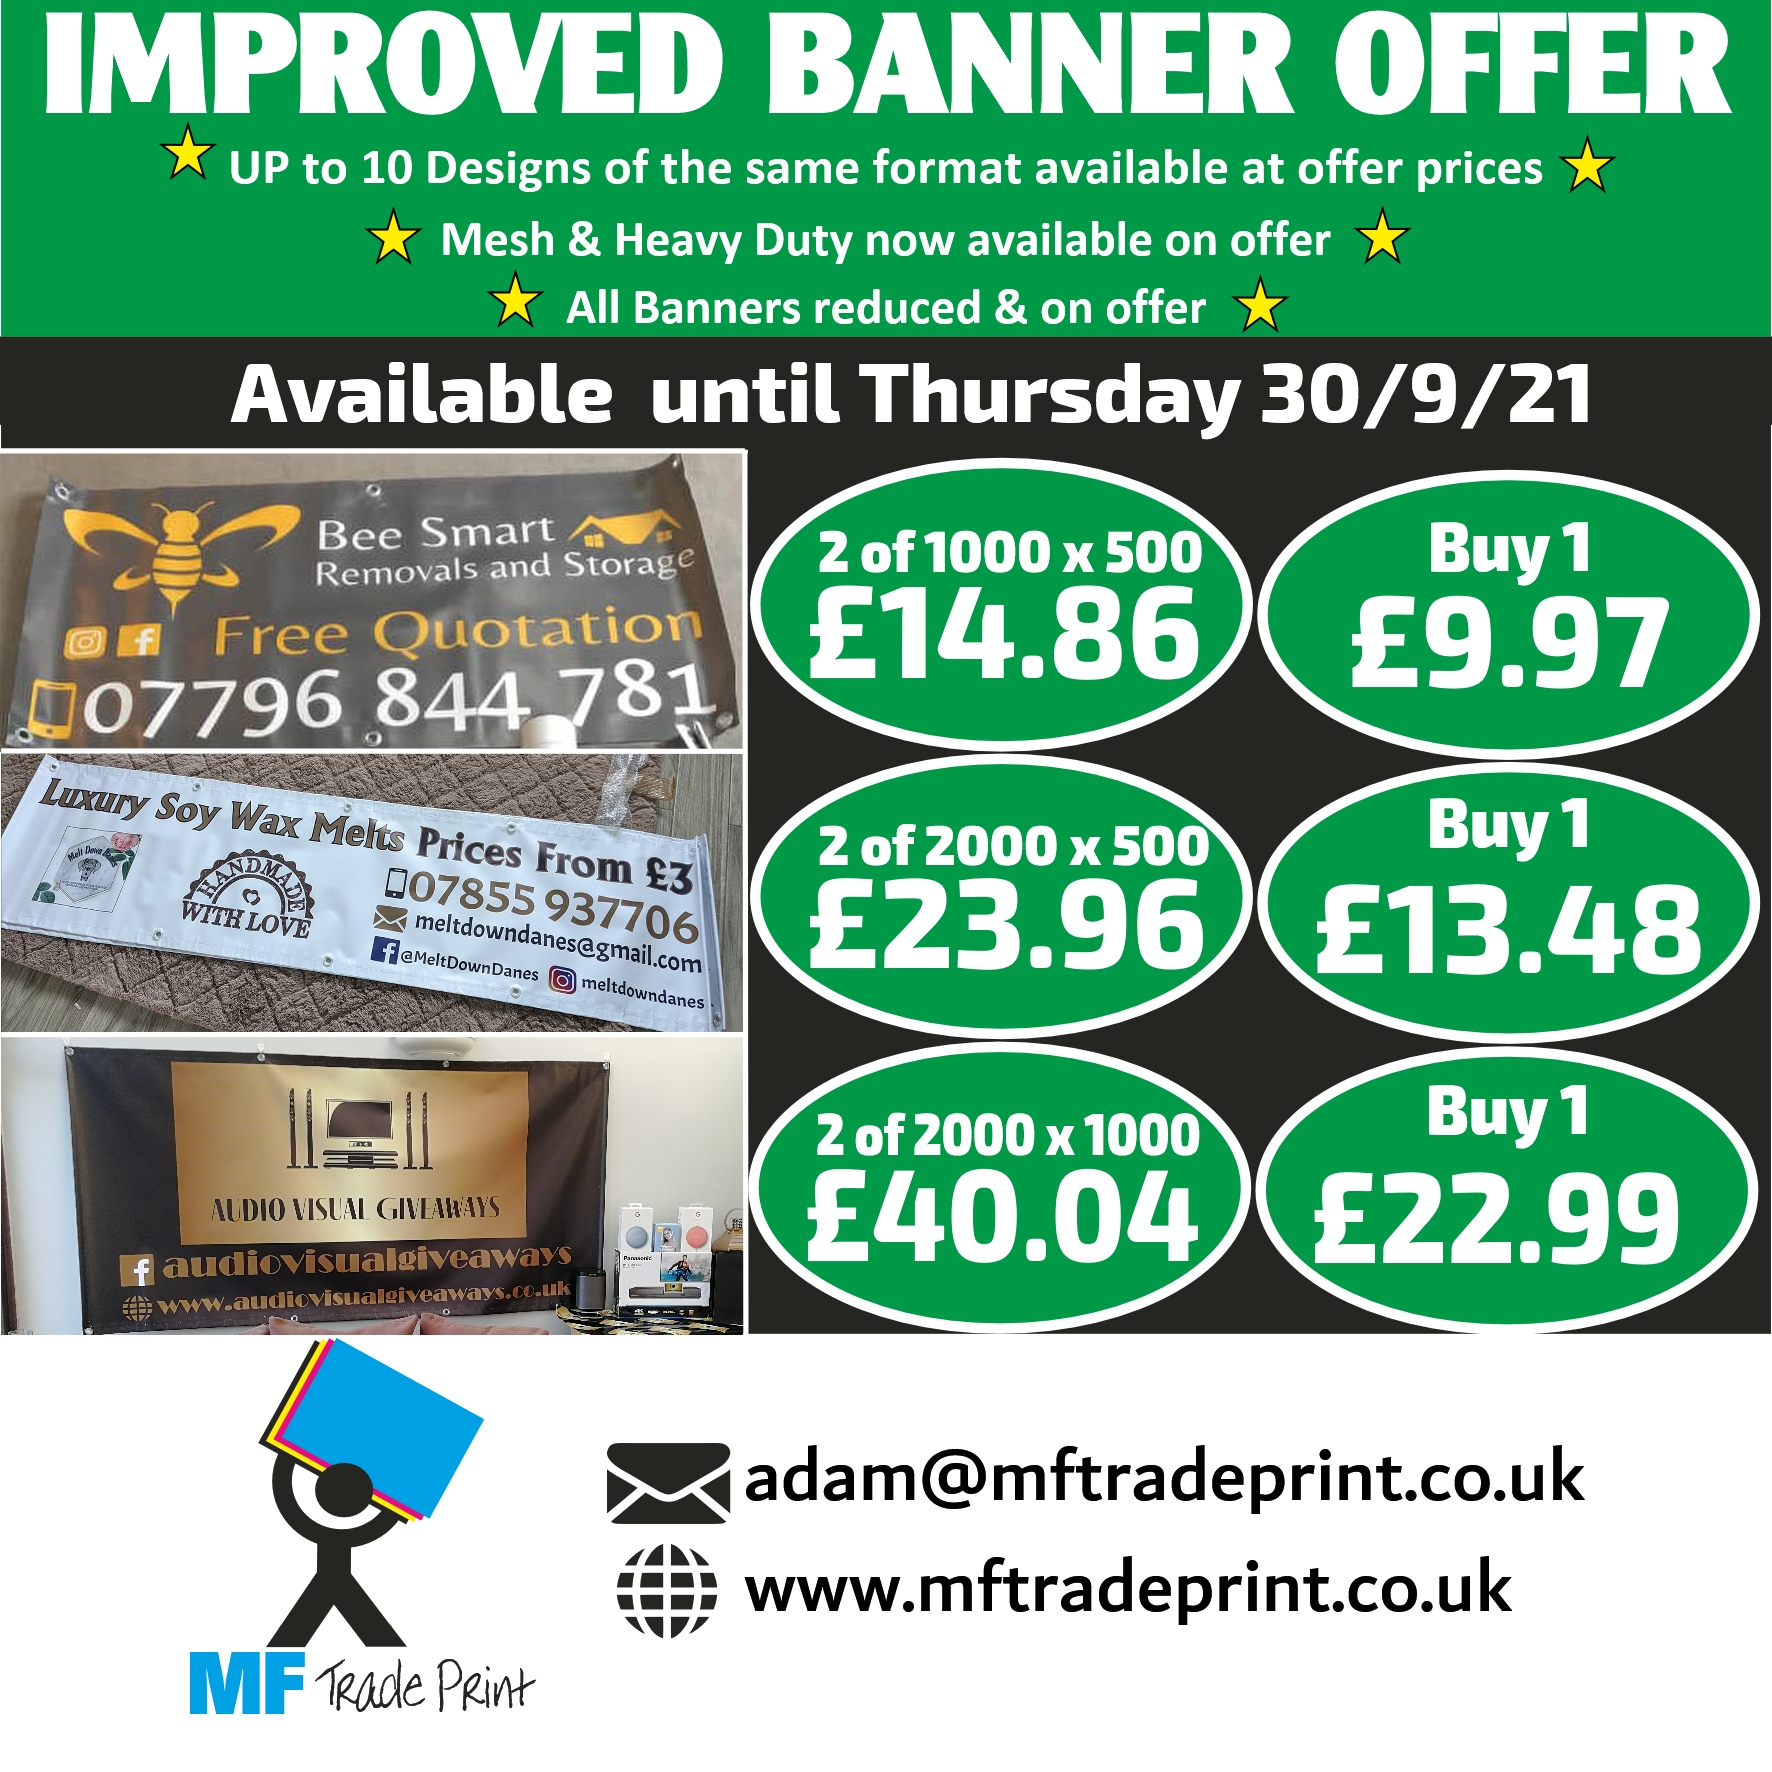 #monthly offer multi buy banners offer bulk purchase pvc banners